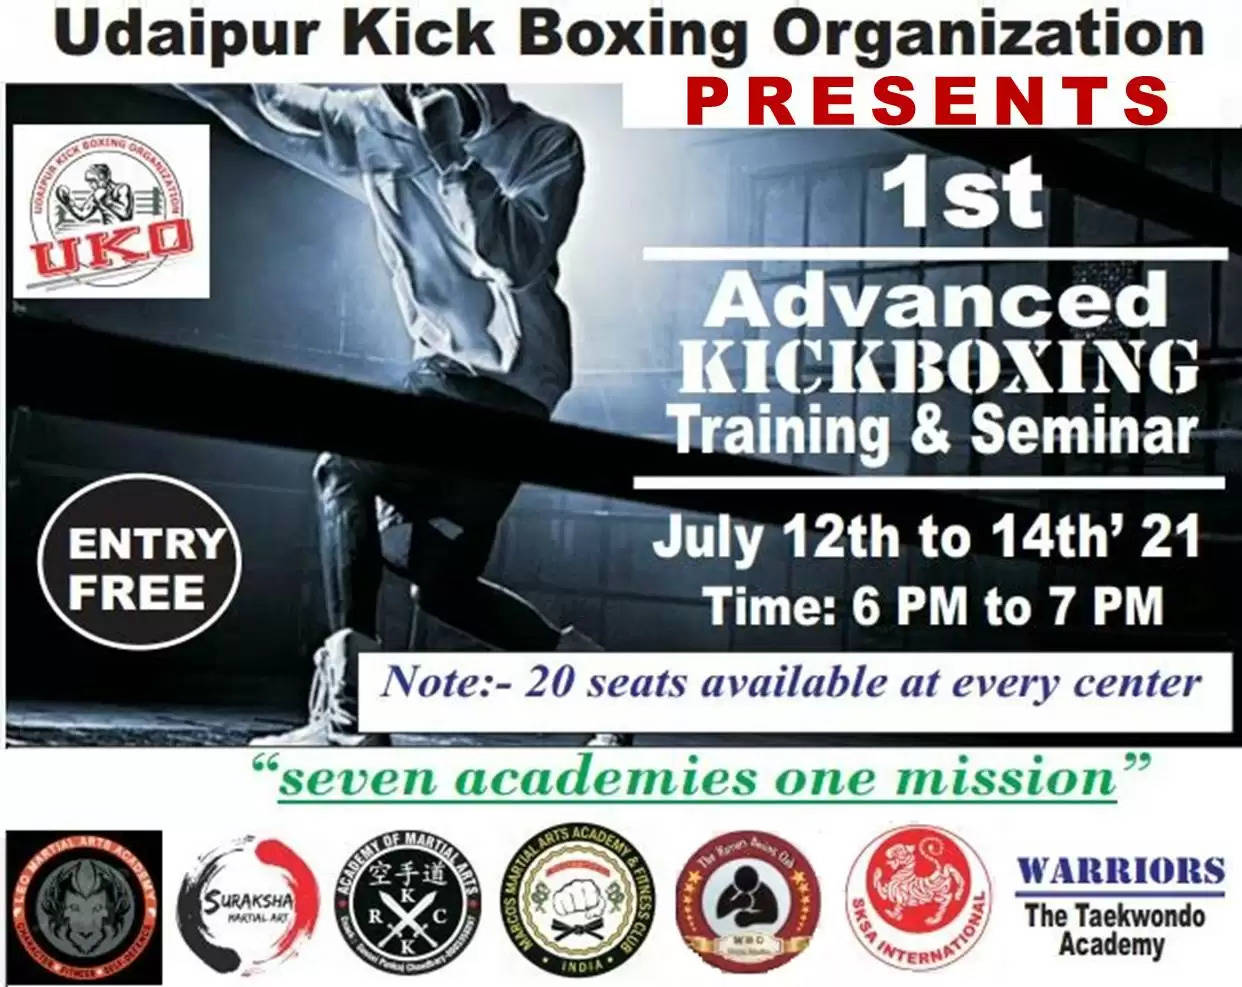 UDAIPUR KICK BOXING THREE DAY FREE TRAINING CAMP MARTIAL ARTS IN UDAIPUR EVENTS IN UDAIPUR